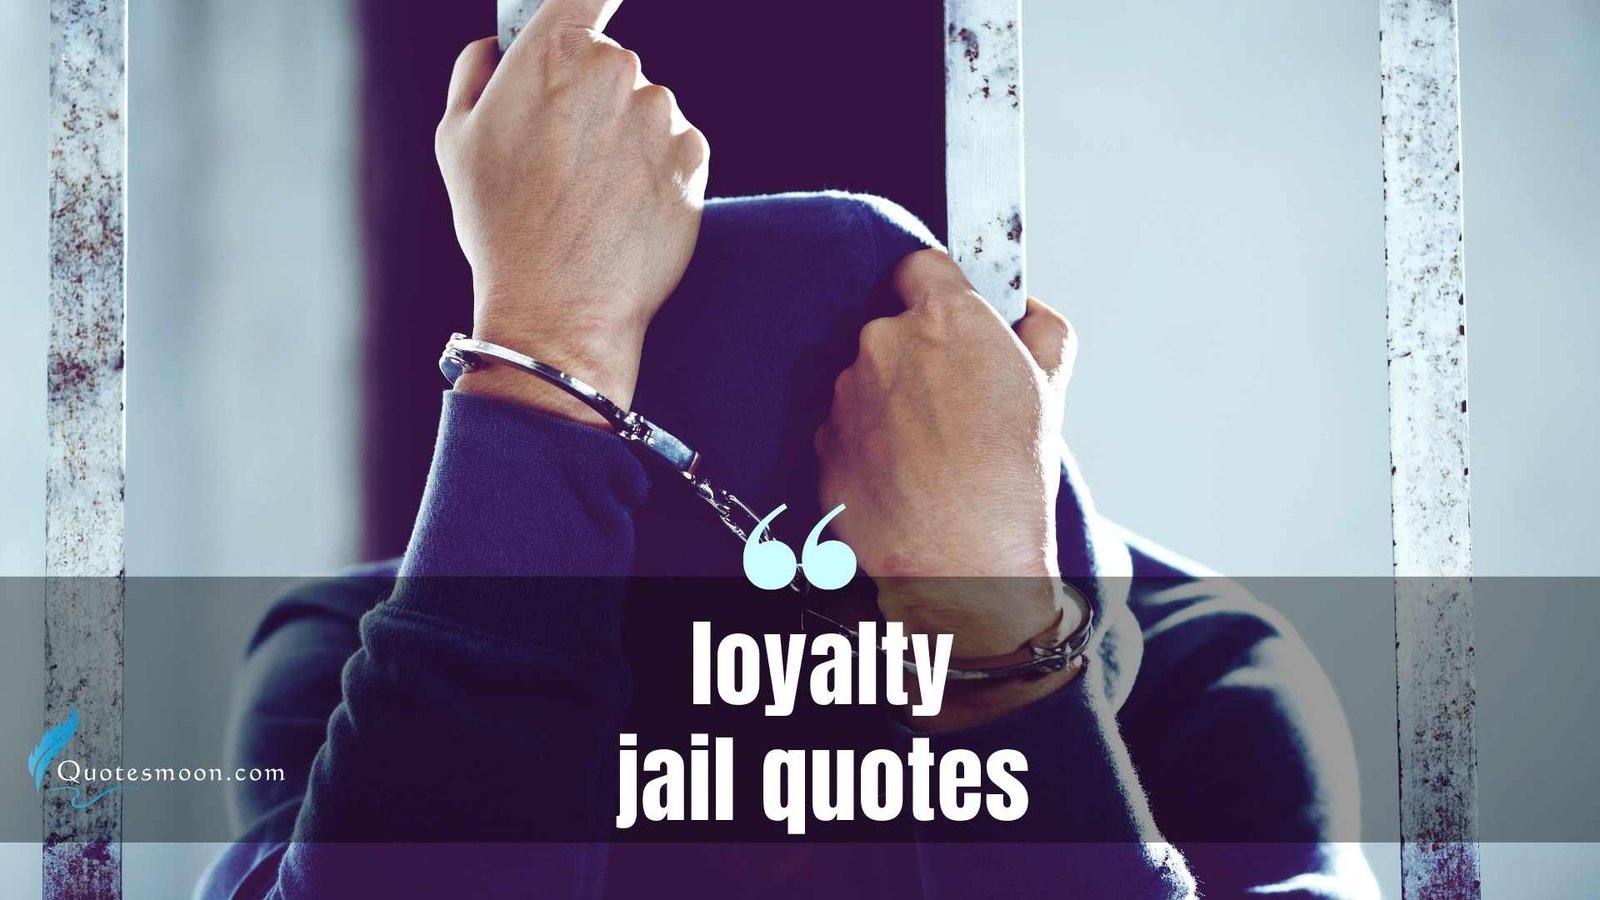 Loyalty Jail Quotes